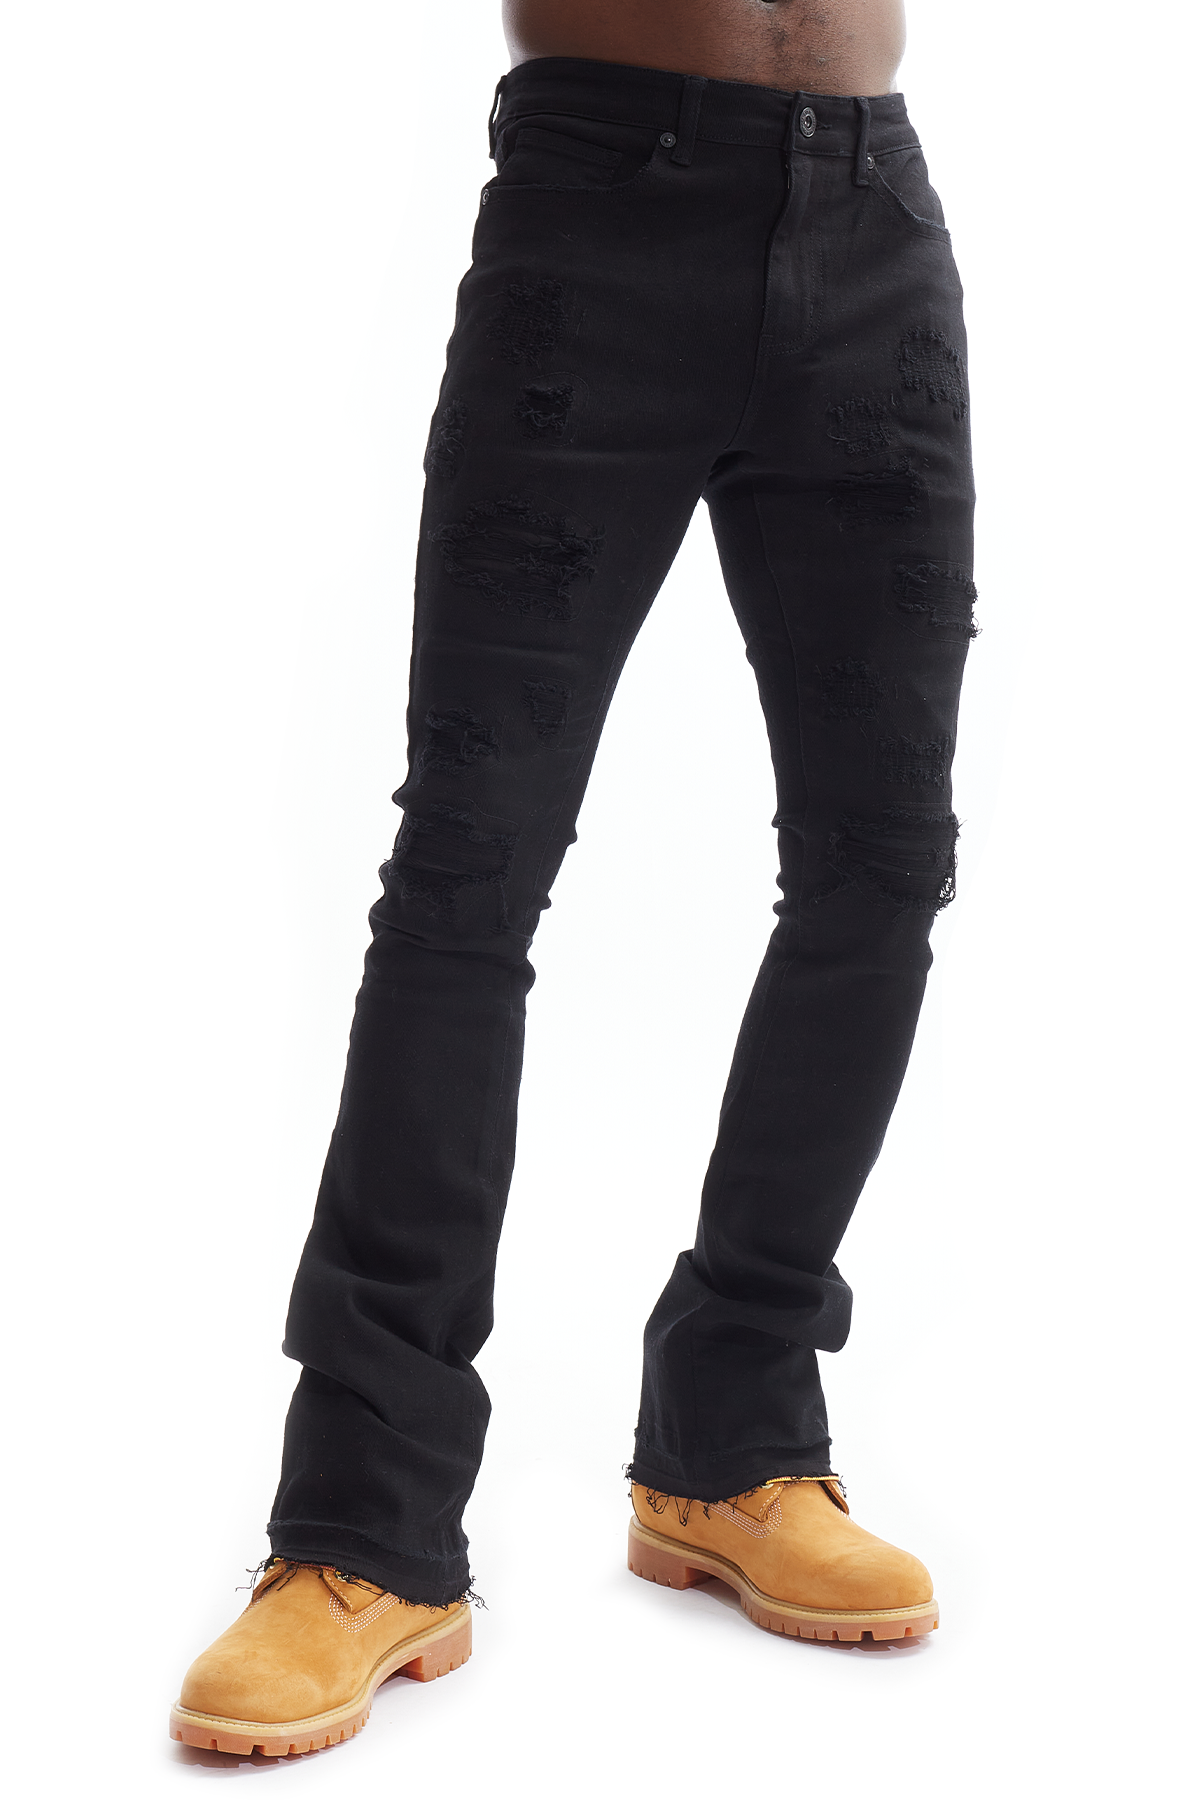 RIP-OFF / REPAIR STACKED FLARE FIT JEANS - DP22860-S